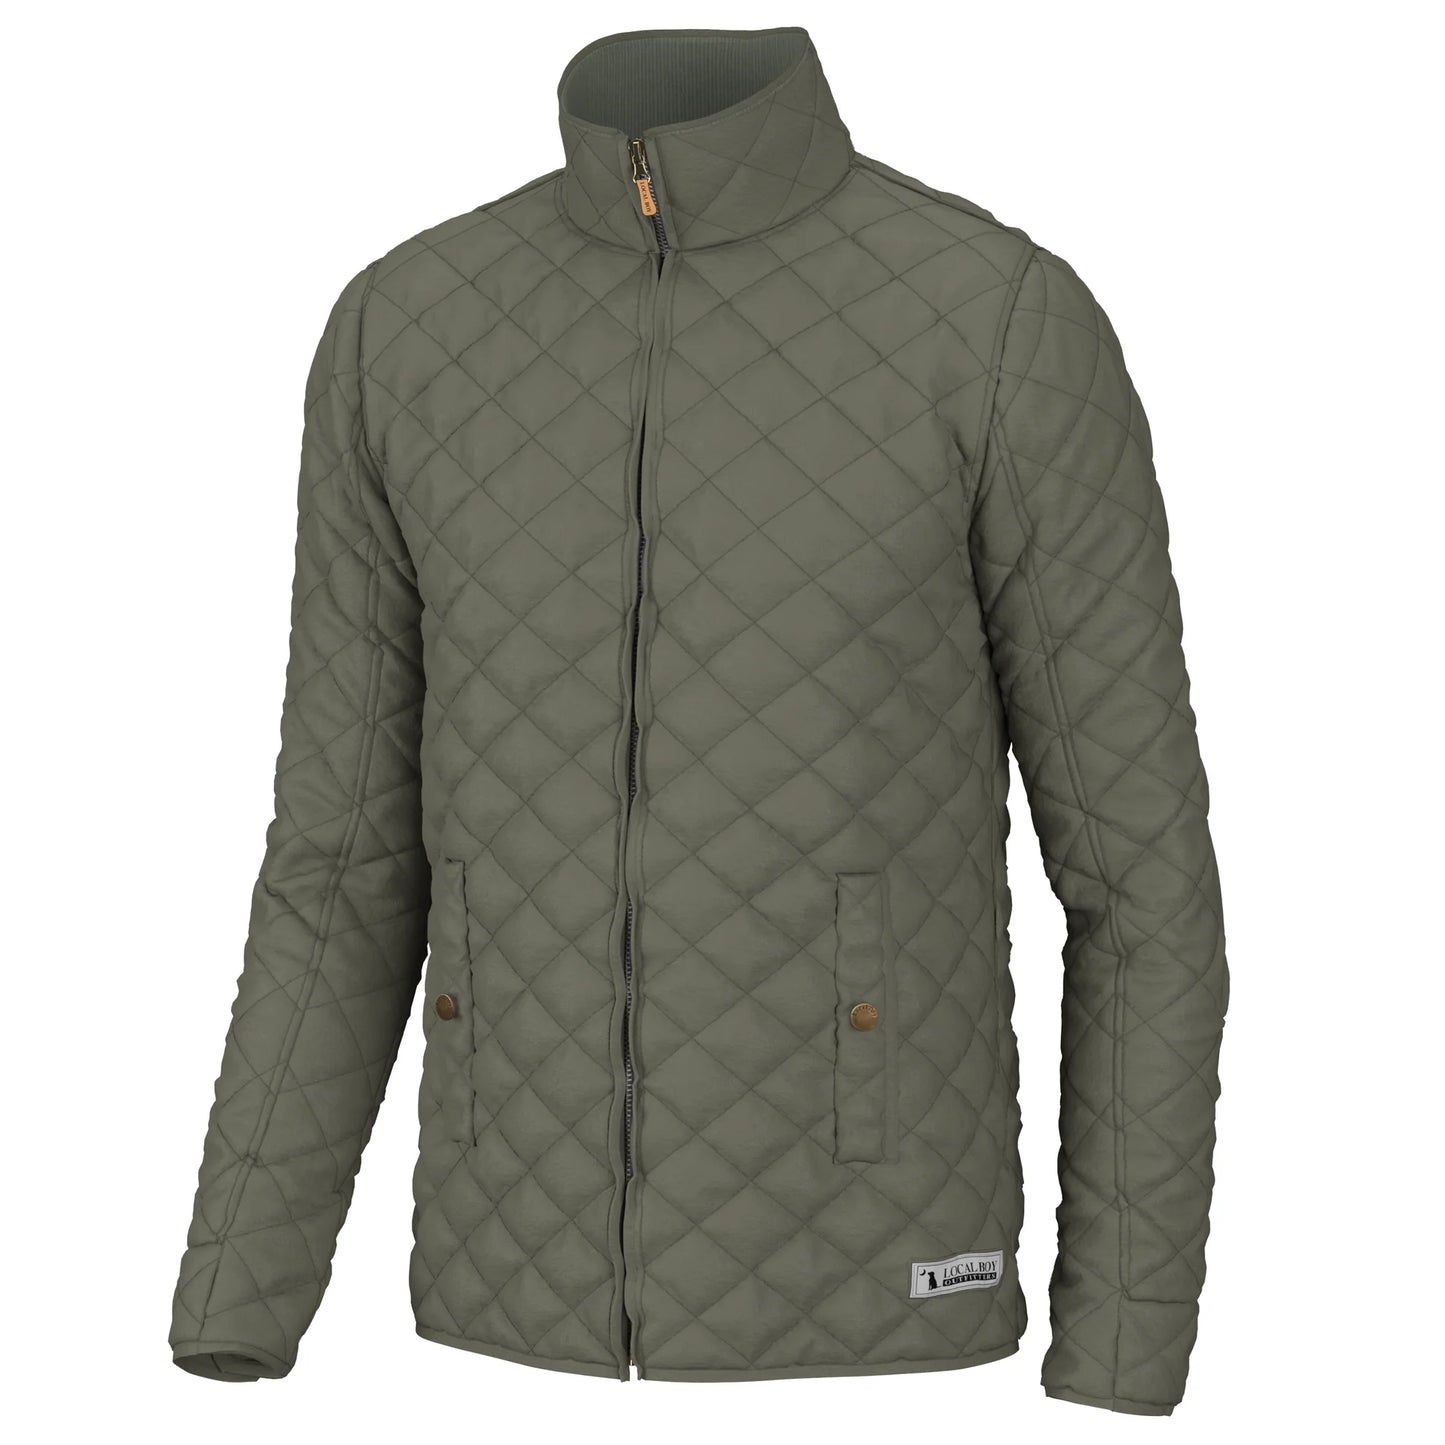 Local Boy- Quilted Jacket, Marsh Green